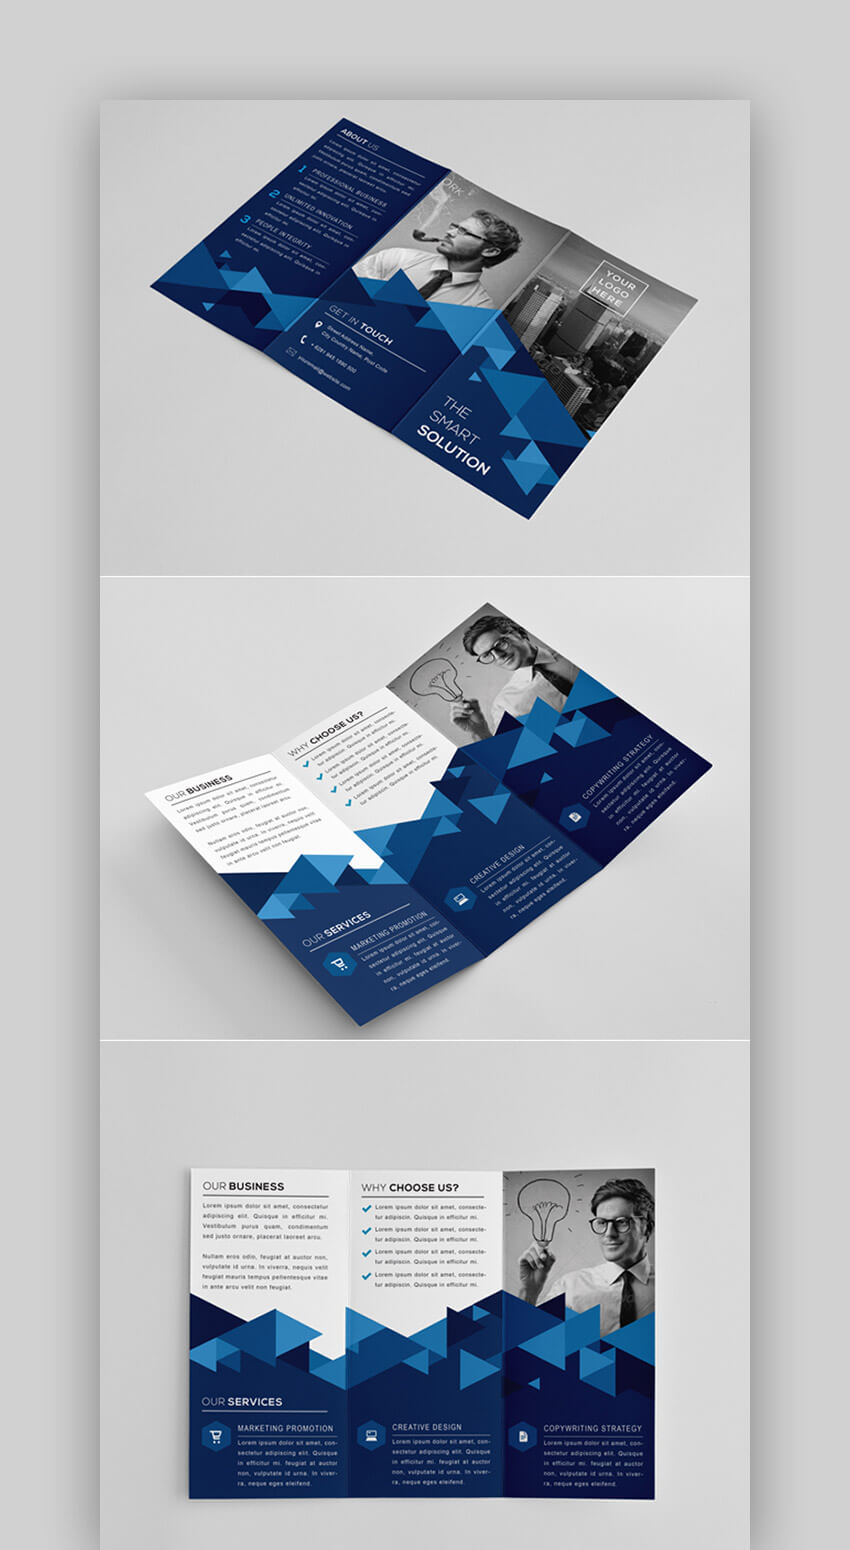 016 Tri Fold Brochure Template Indesign The Modern With Regard To Tri Fold Brochure Template Indesign Free Download